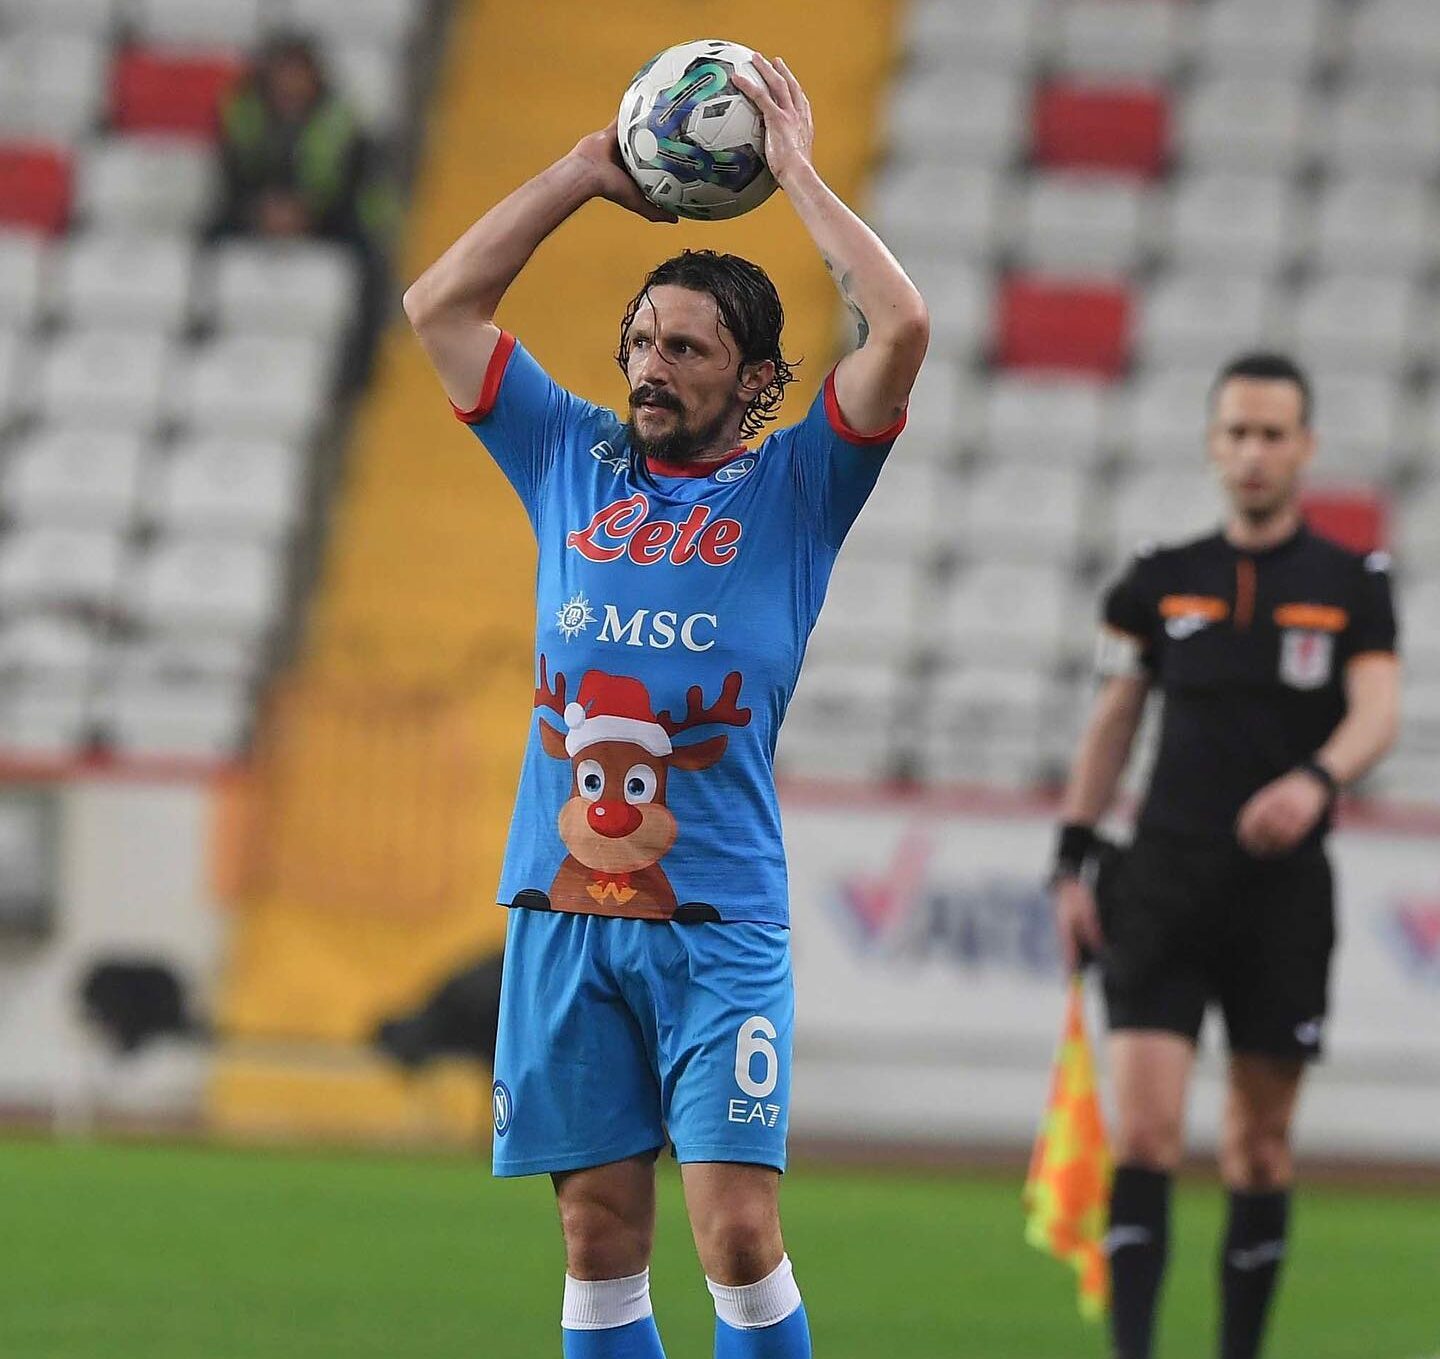 Mario Rui, SSC Napoli player, is preparing to take a throw-in